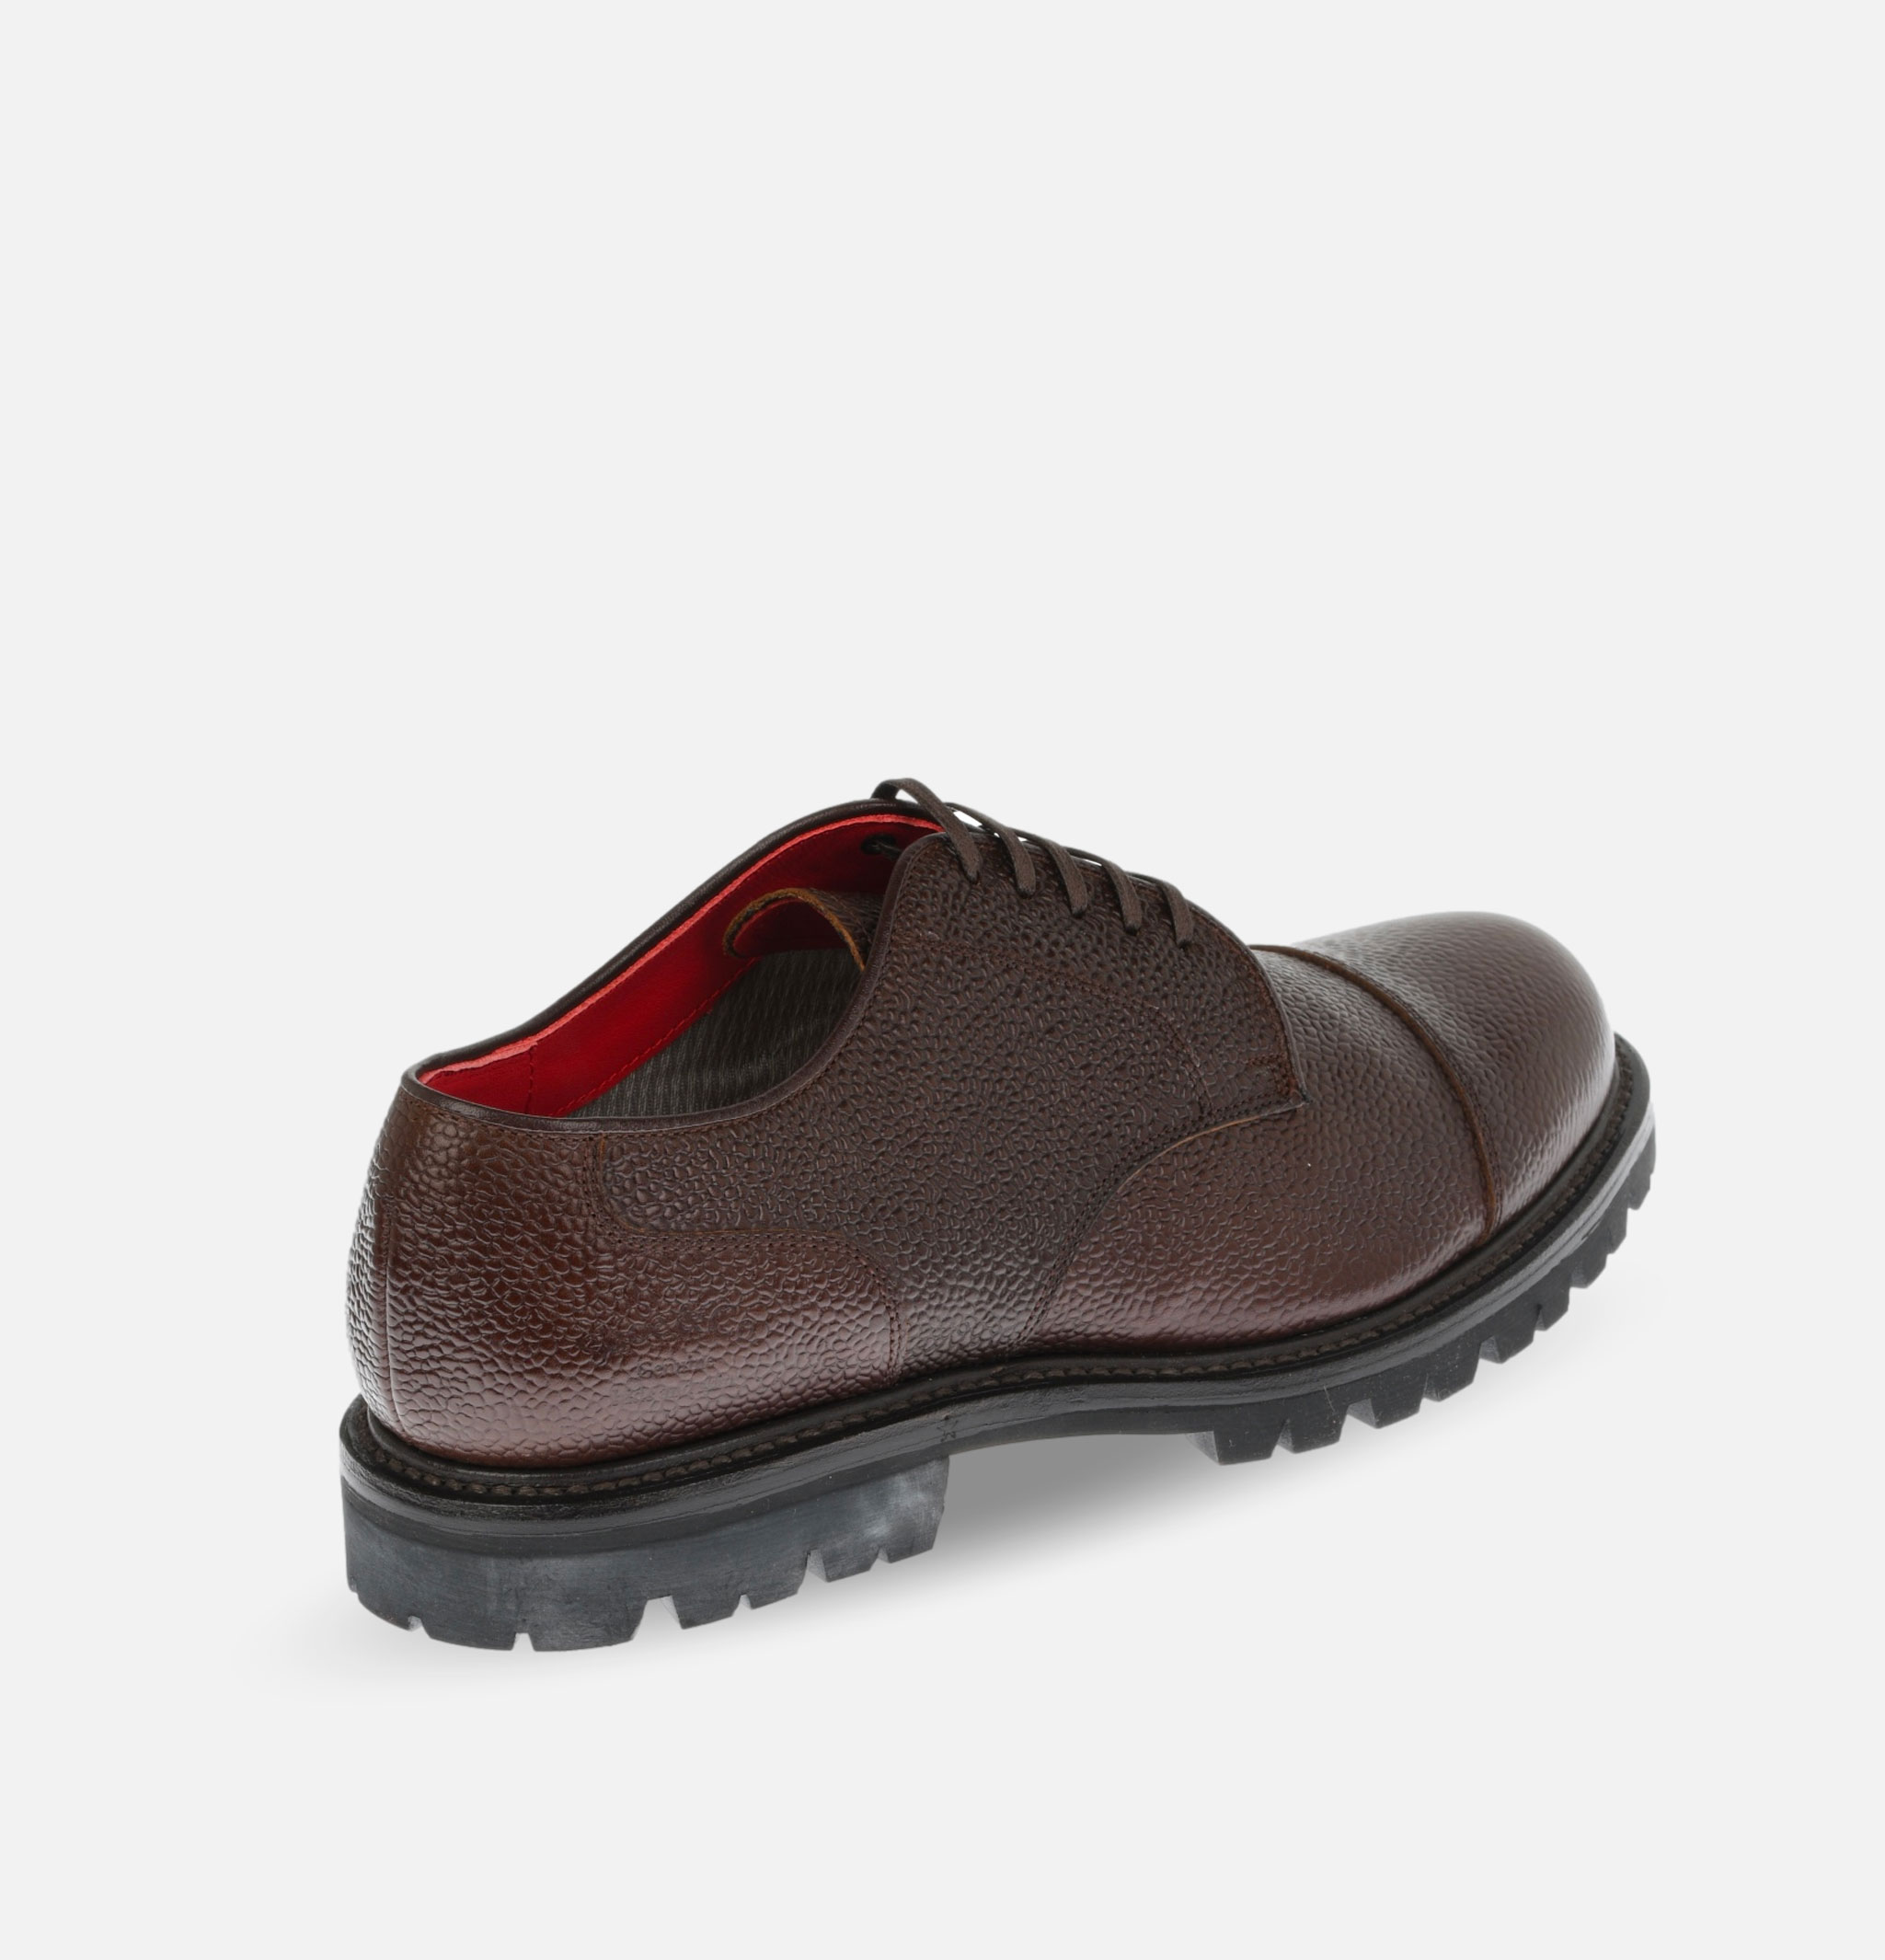 Chaussures Regal Shoe & Co Straight Tip Brown Gore-tex